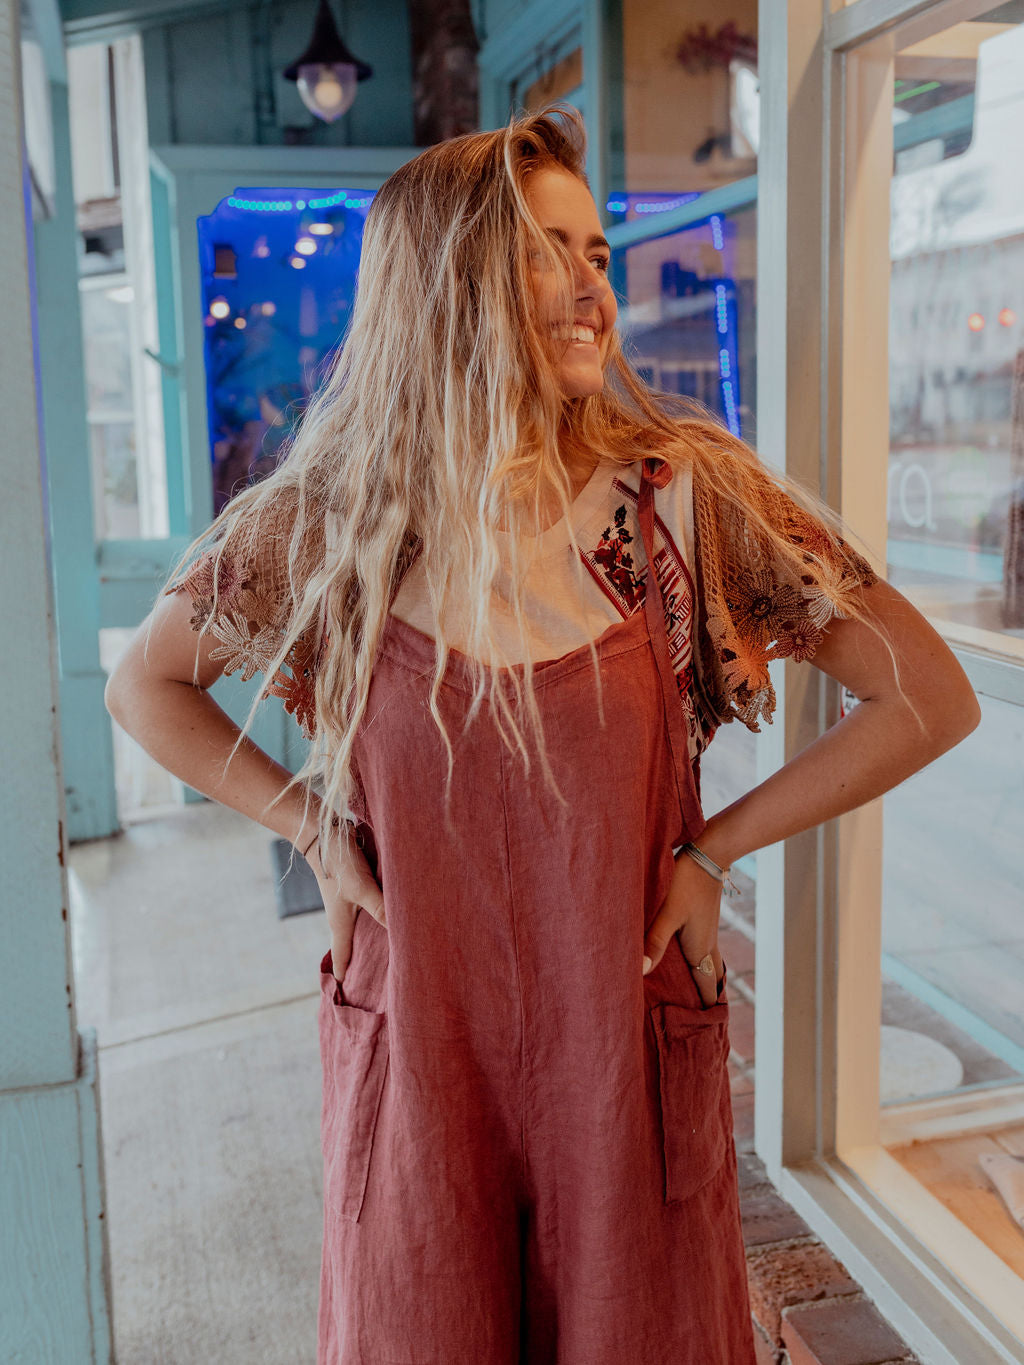 Free People Women's As If Tee, Misty Mink Combo (as1, Alpha, x_s, Regular,  Regular) at  Women's Clothing store